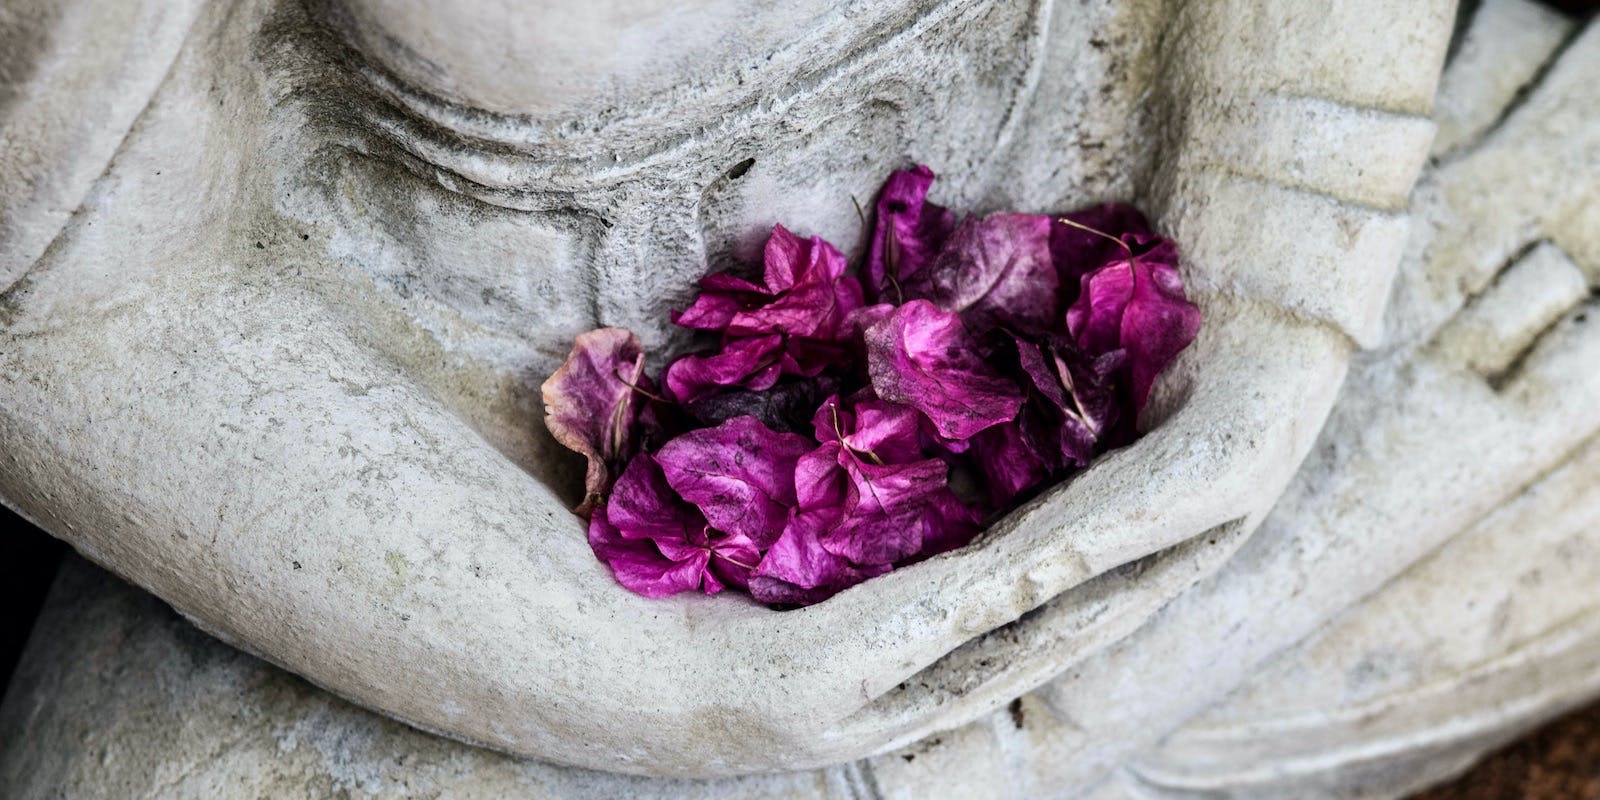 A closeup photograph of a buddha statue's hands full of purple flowers.